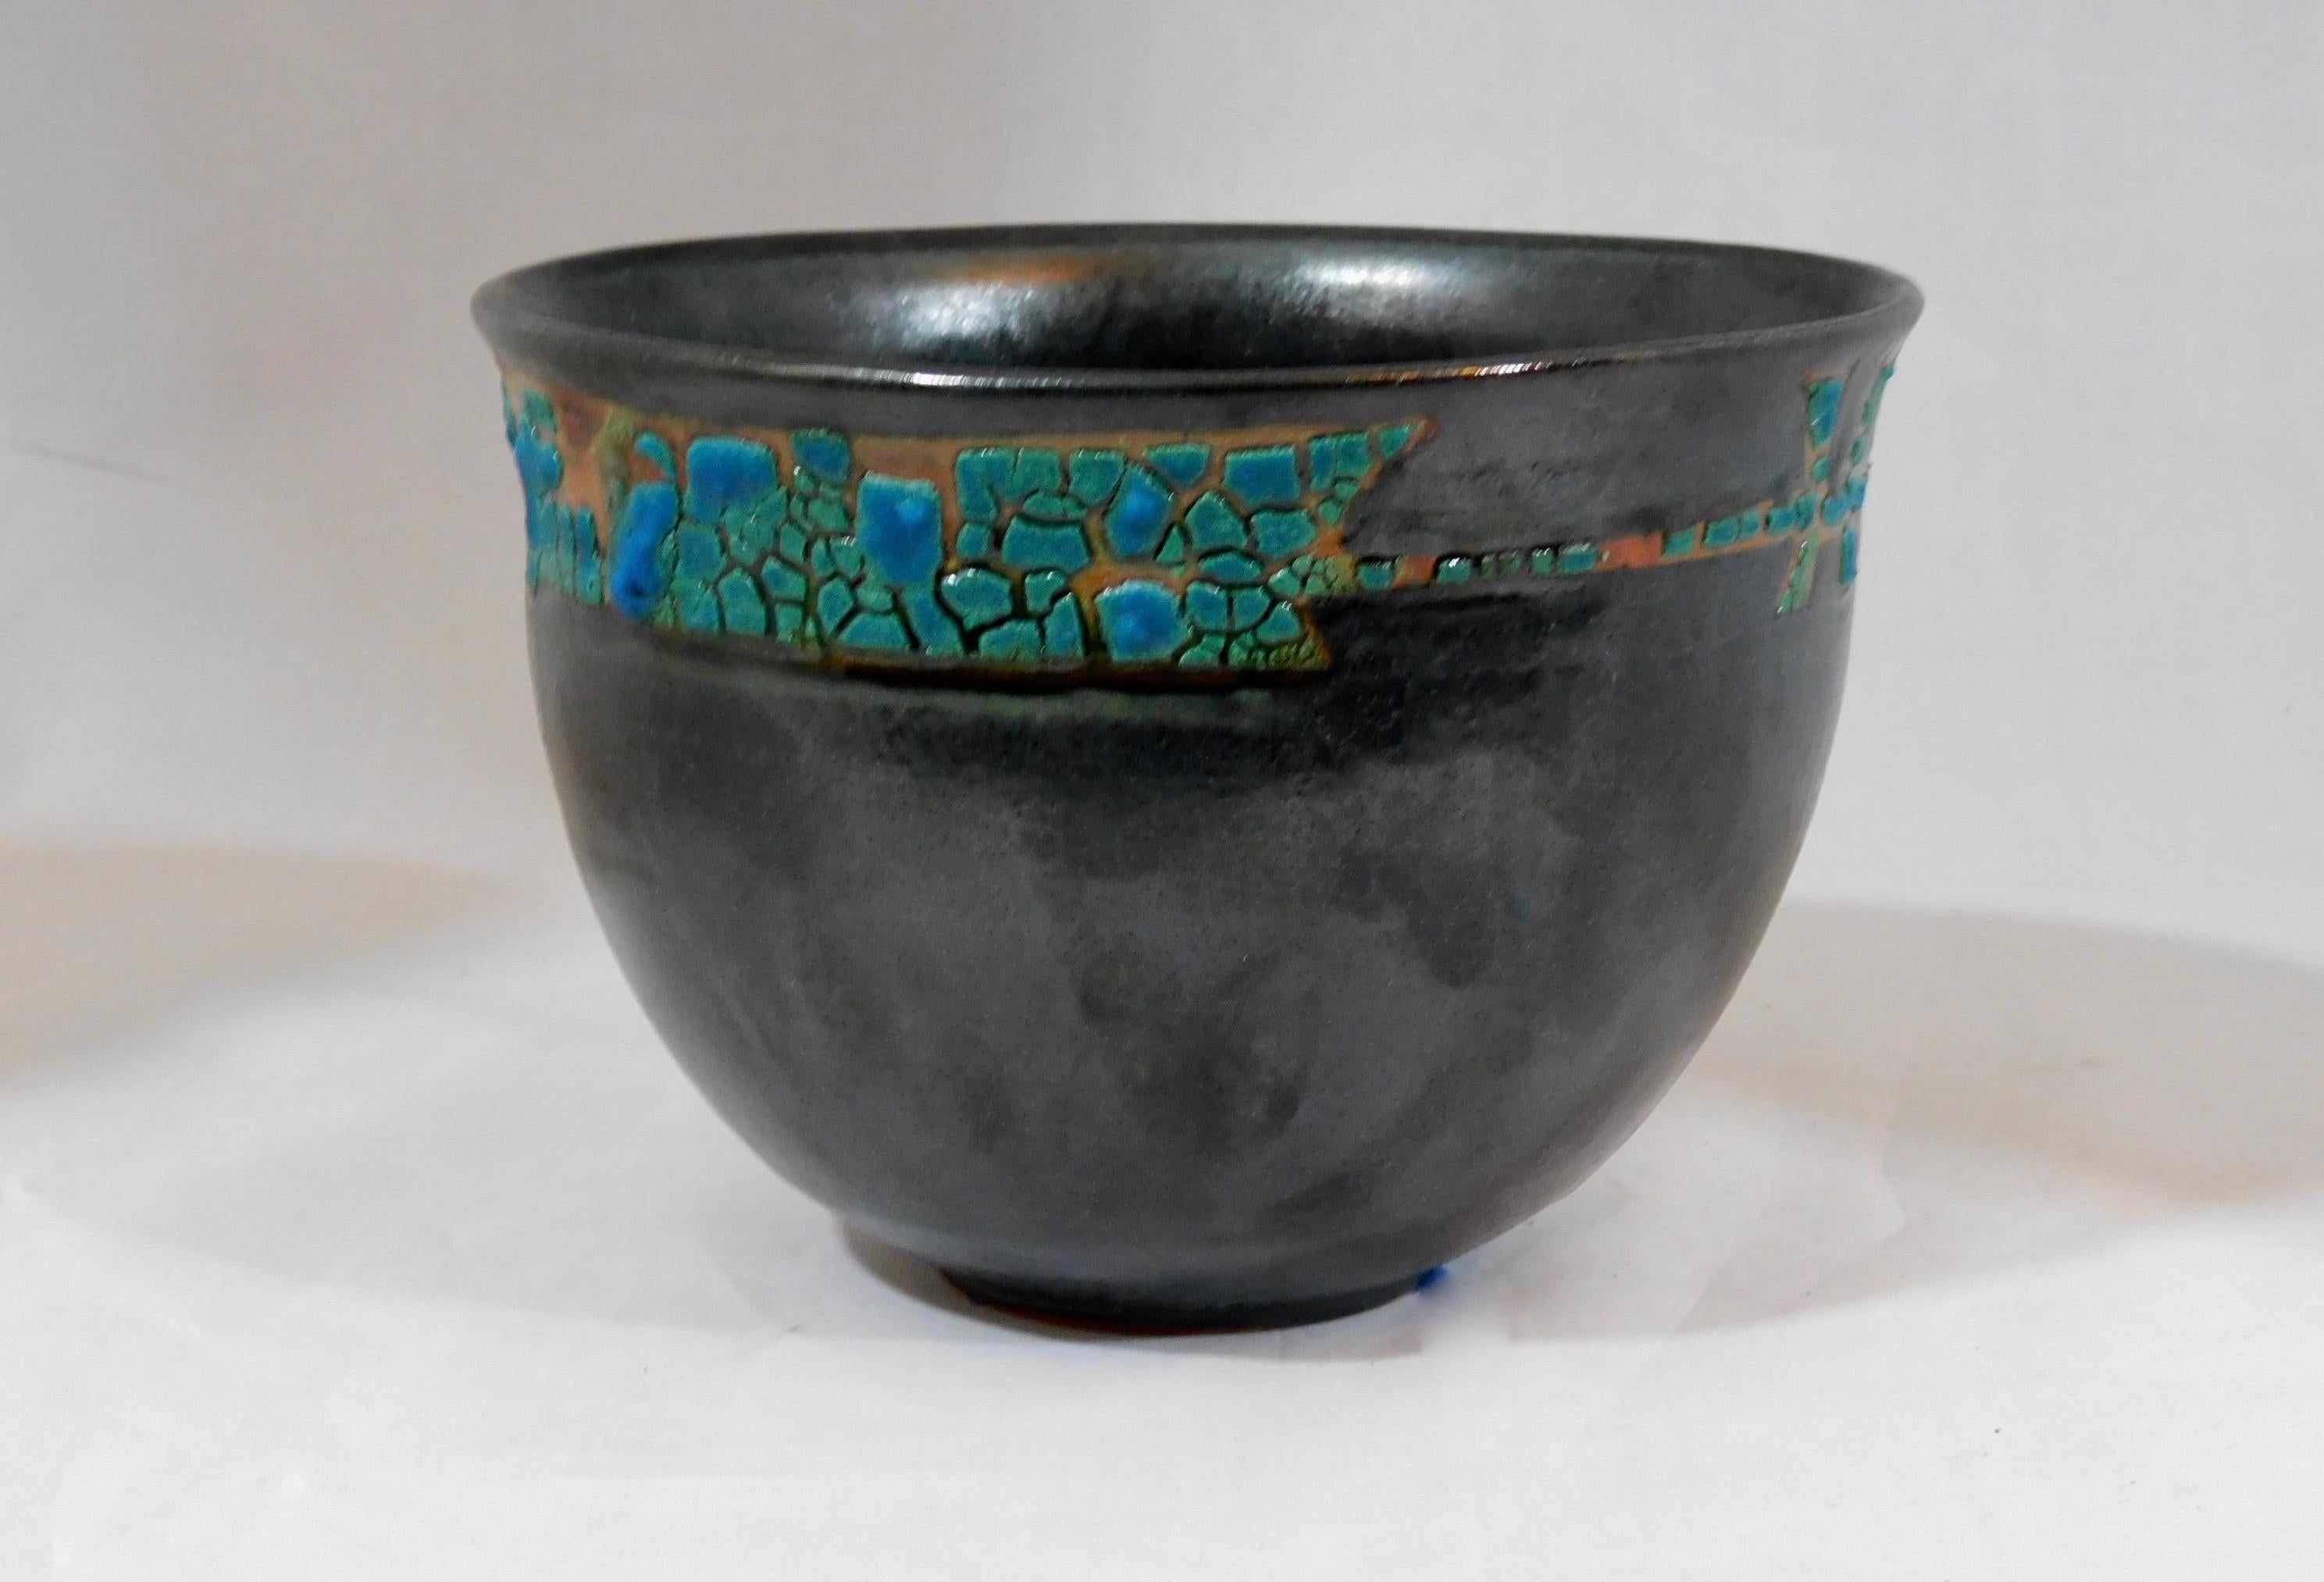 Ferrera wheel thrown earthenware vessel by ceramicist Andrew Wilder.
This is a one of a kind object made in the ancient way- by hand in a small artisanal pottery. In this series Wilder explores the application of lichen under glazes to achieve